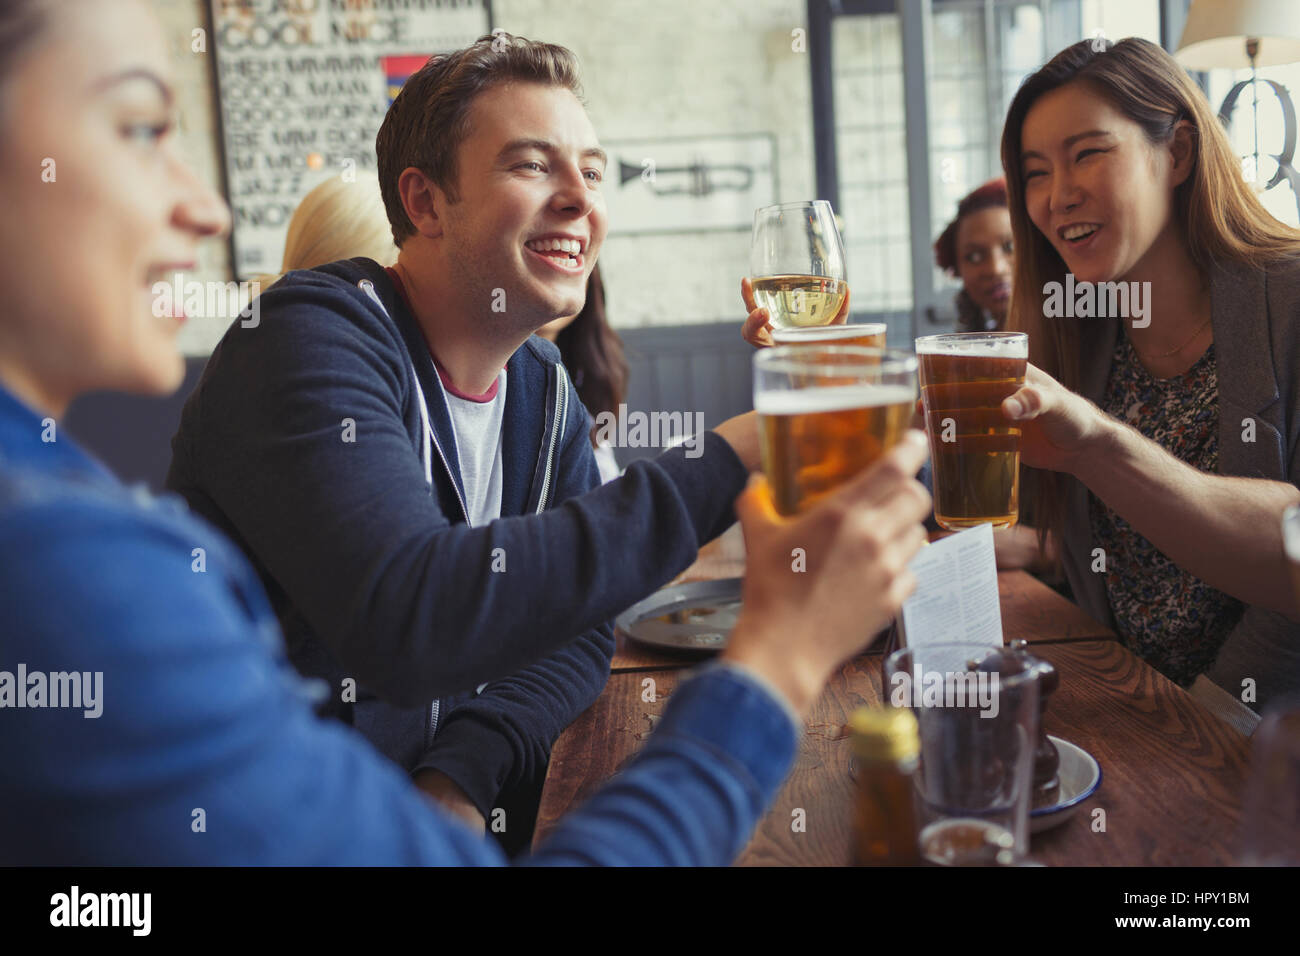 Friends celebrating, toasting beer and wine glasses at table in bar Stock Photo